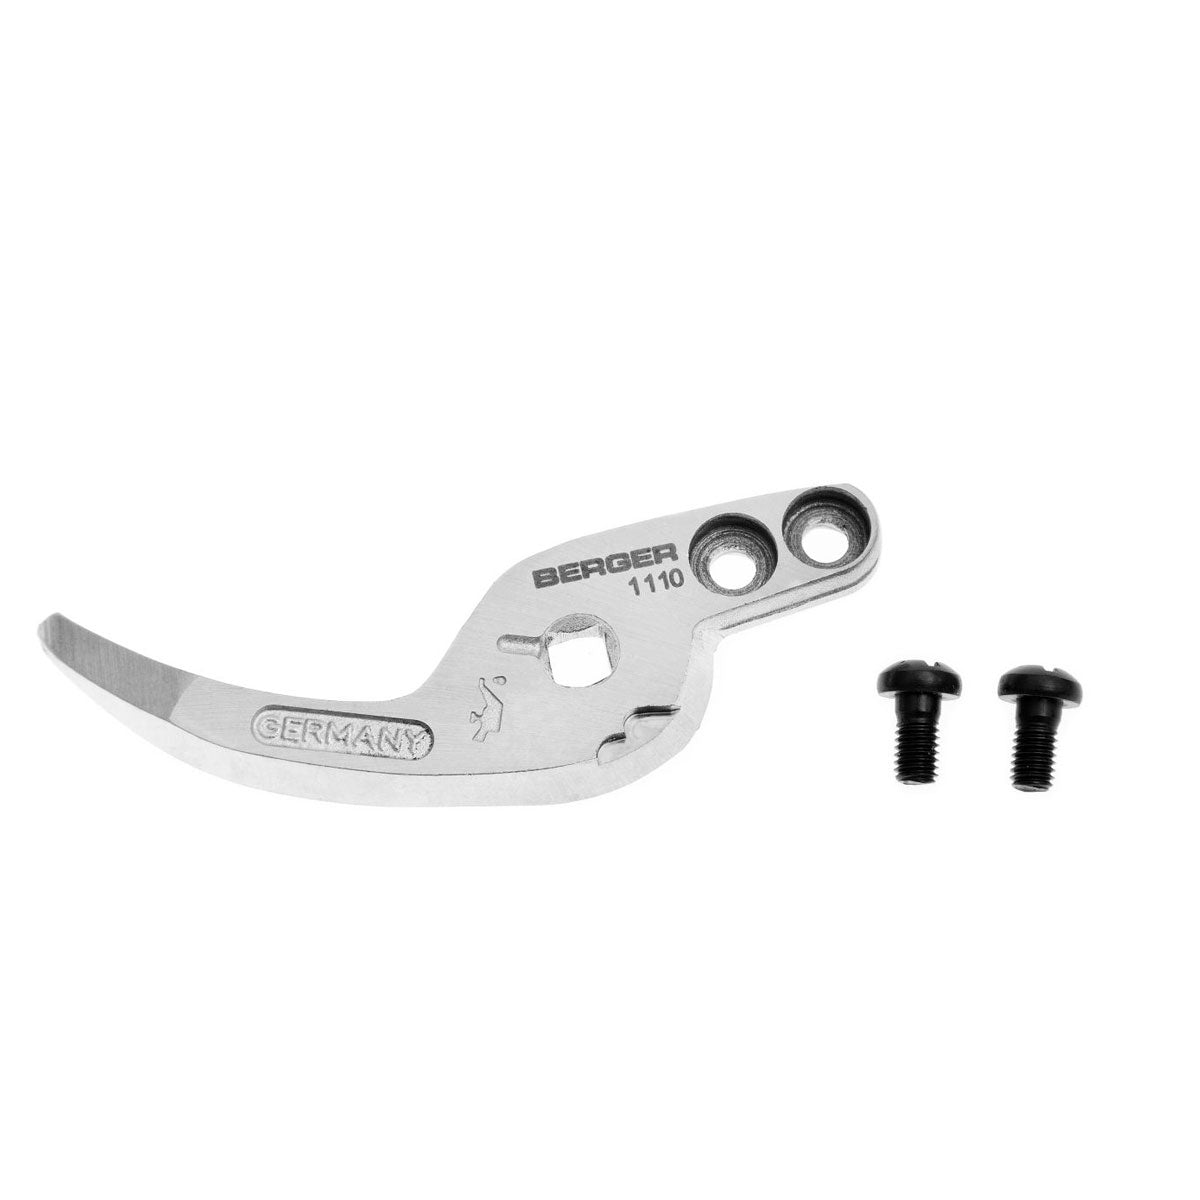 Berger 91005 Counter-Blade for 1110, 1010